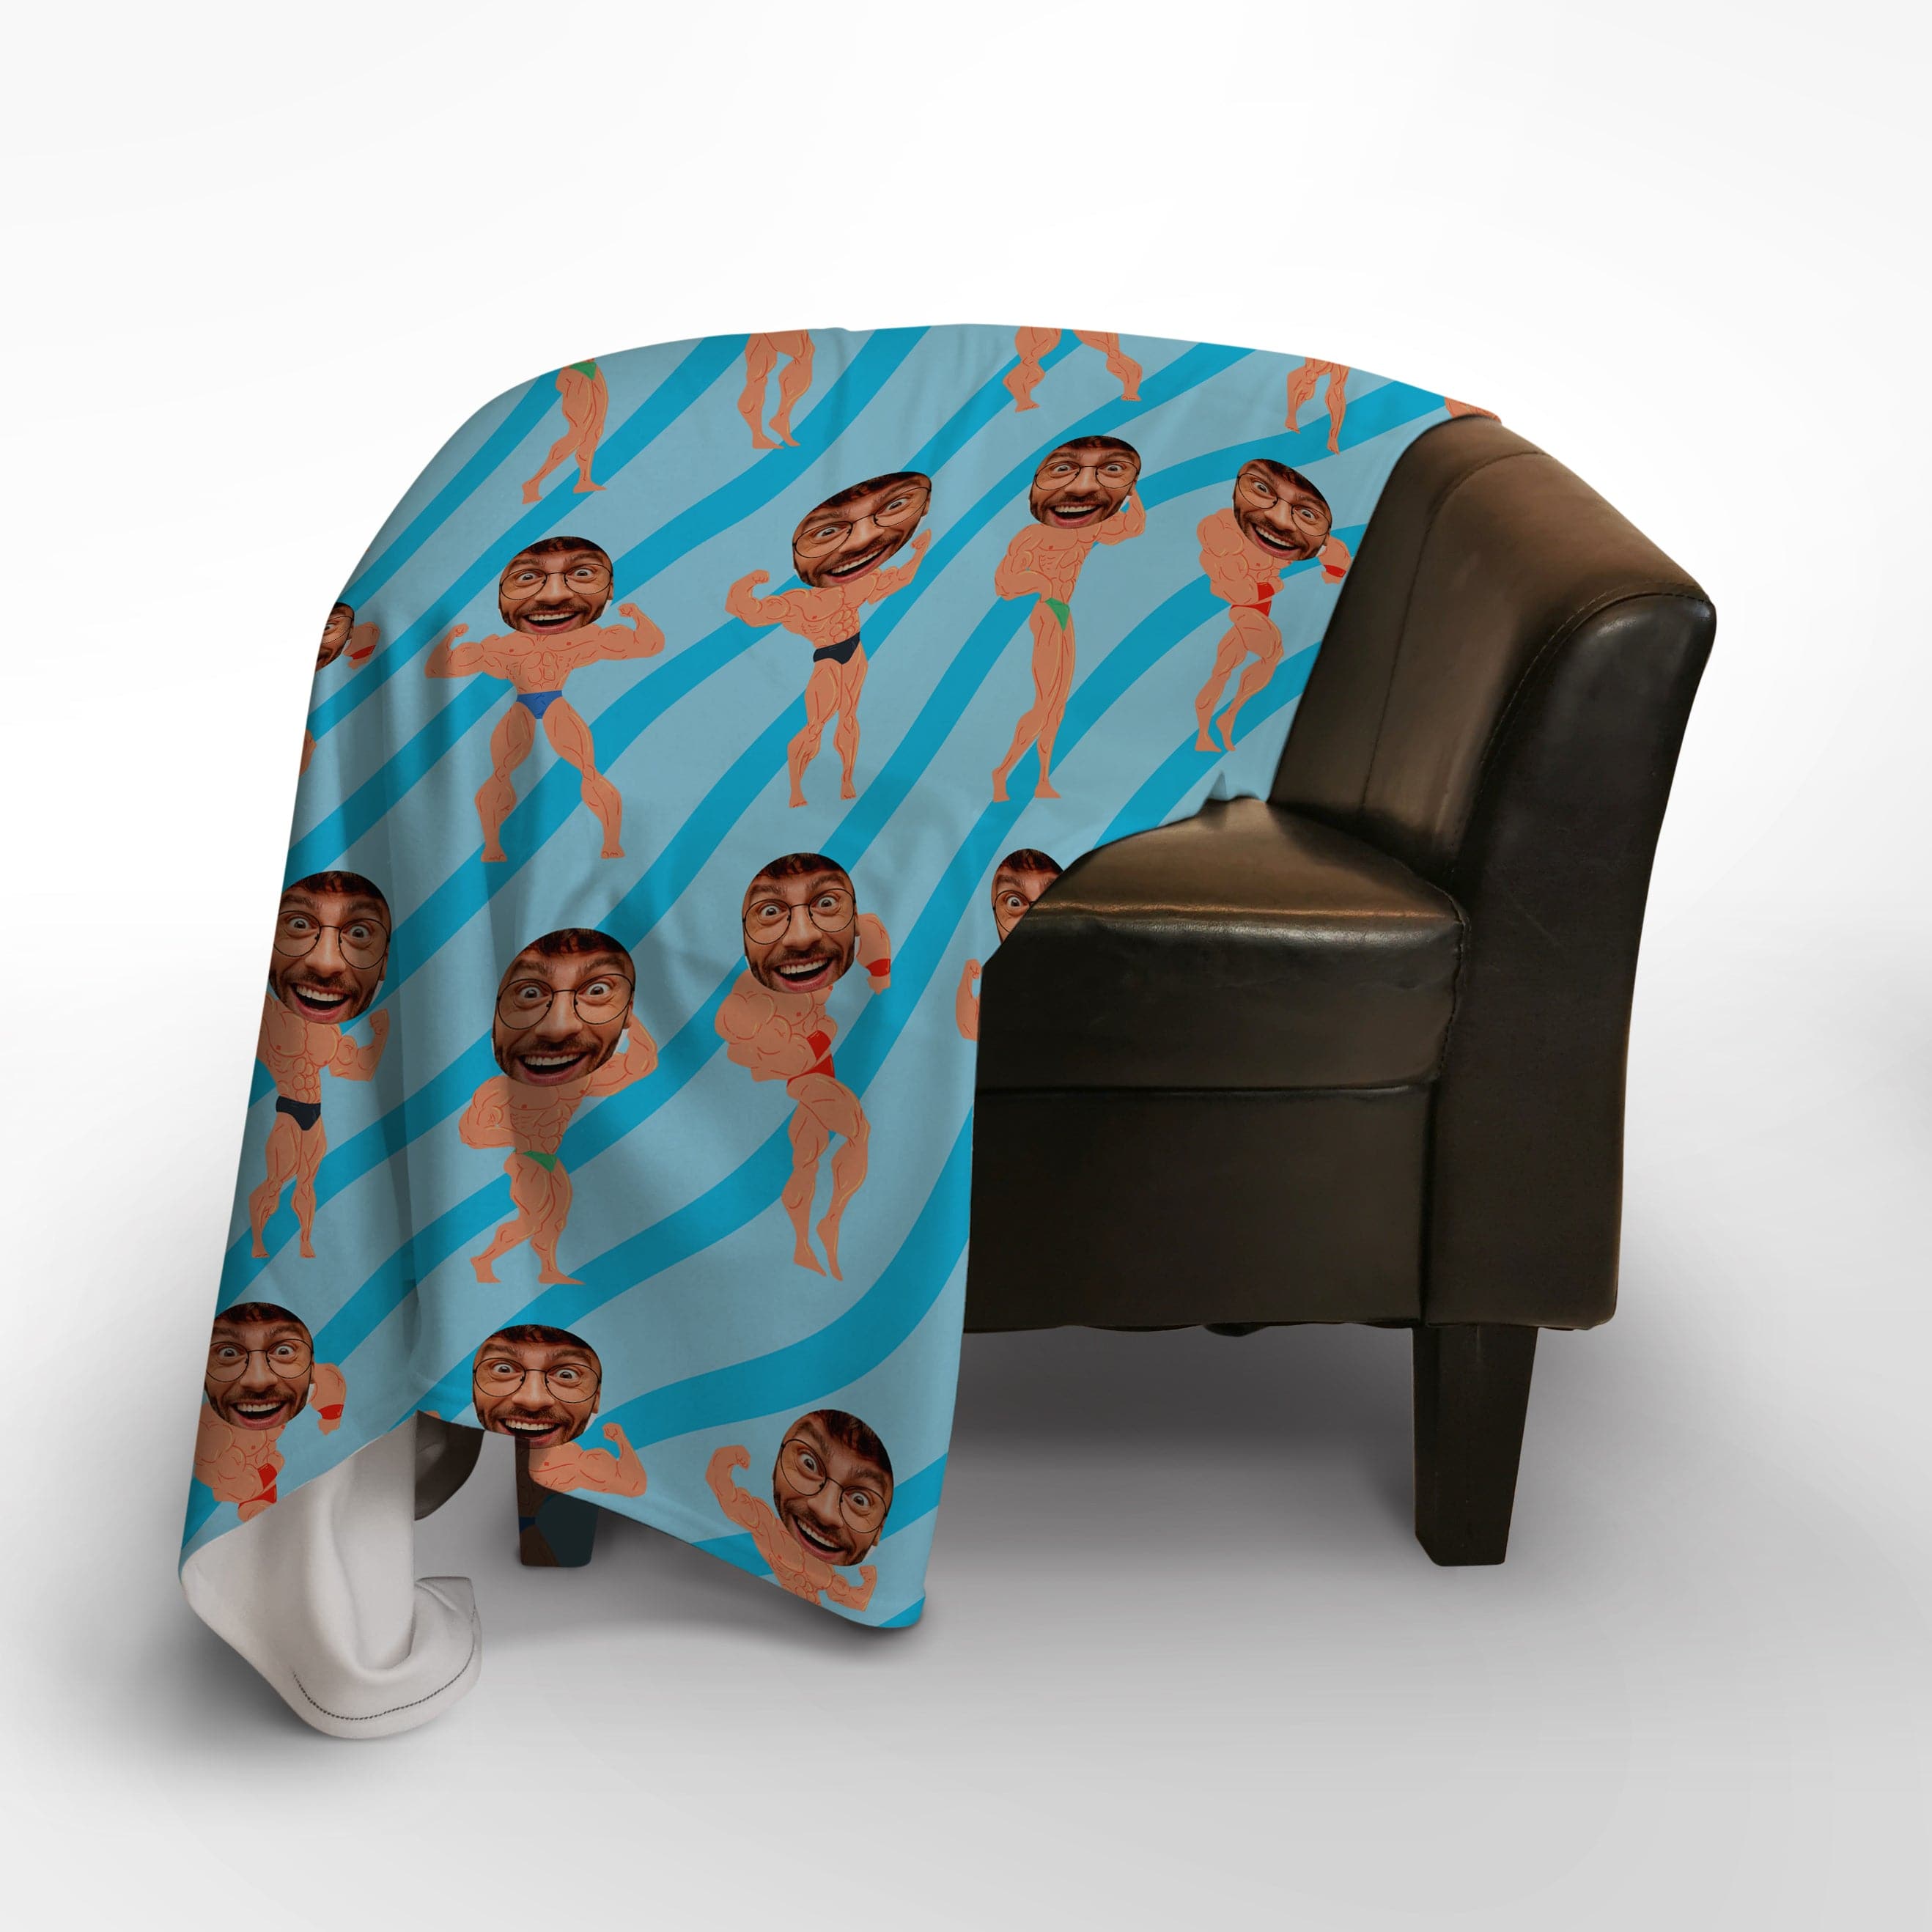 Muscle Man - Face Character Blanket